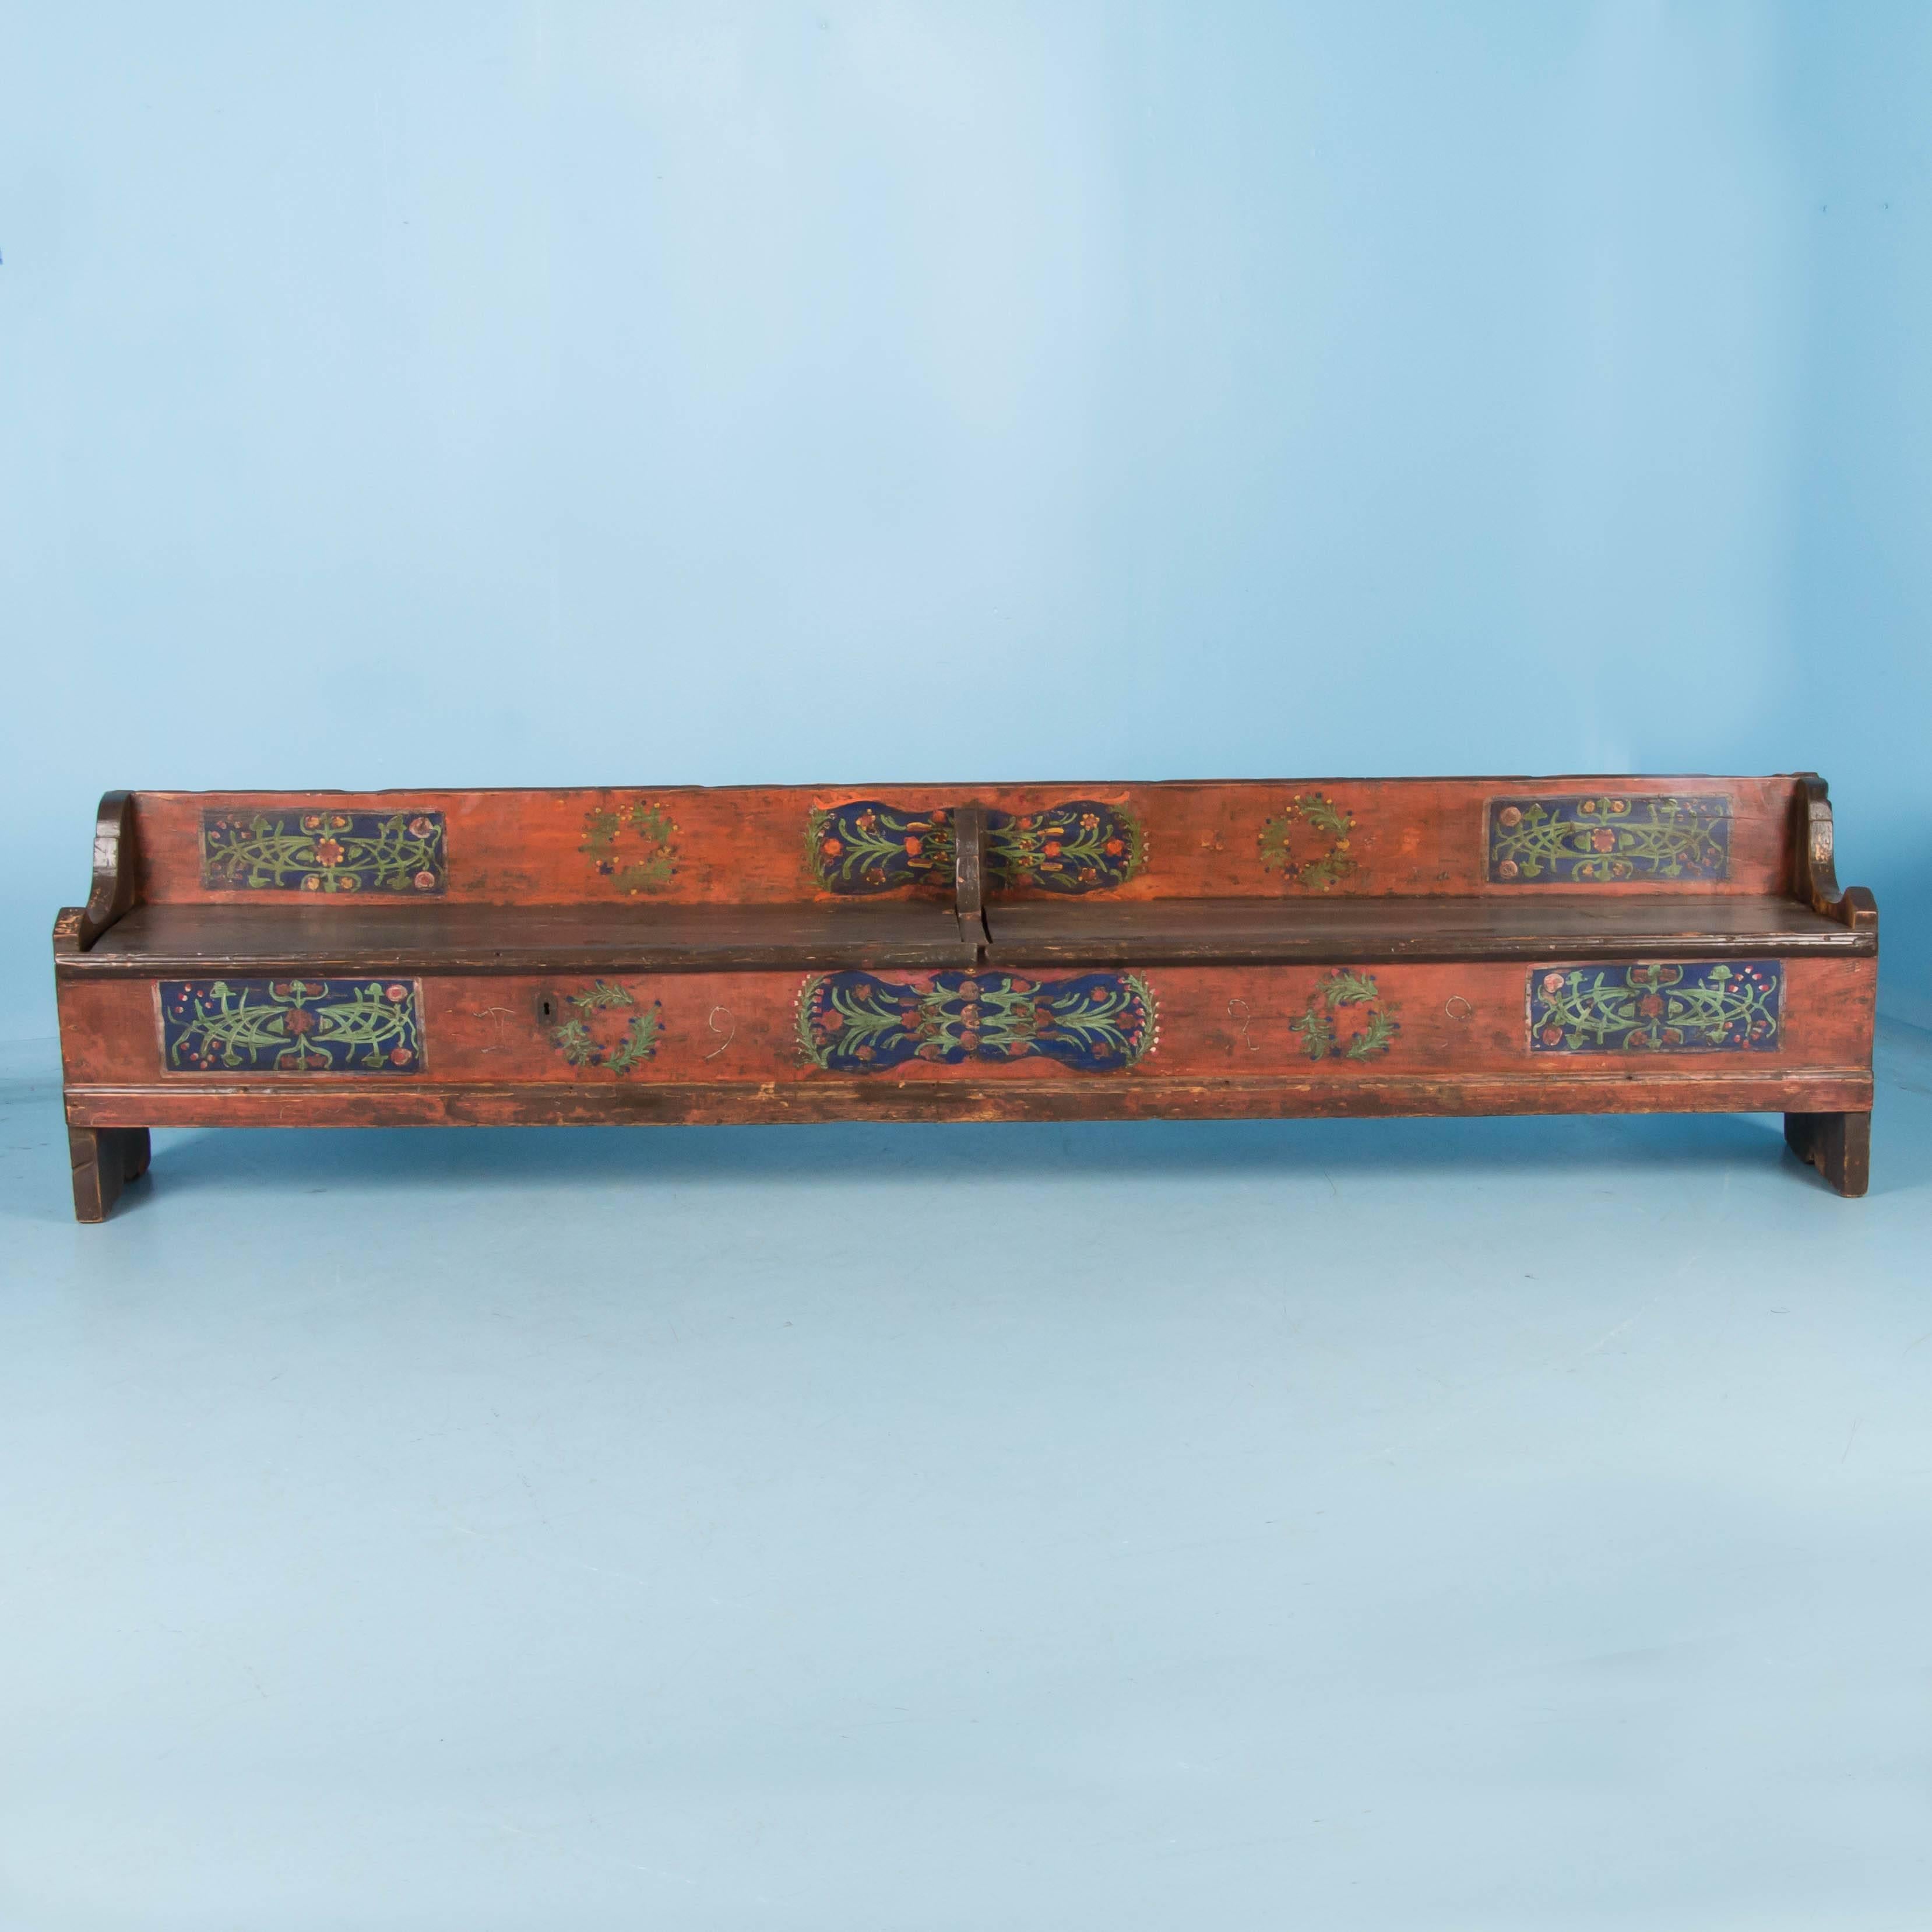 This long pine bench still maintains the original paint from 1929, when it was dated. The traditional Folk Art of the late 1800s into 1900s included floral motifs painted in panels, often using blue and red backgrounds such as this one. It has a low